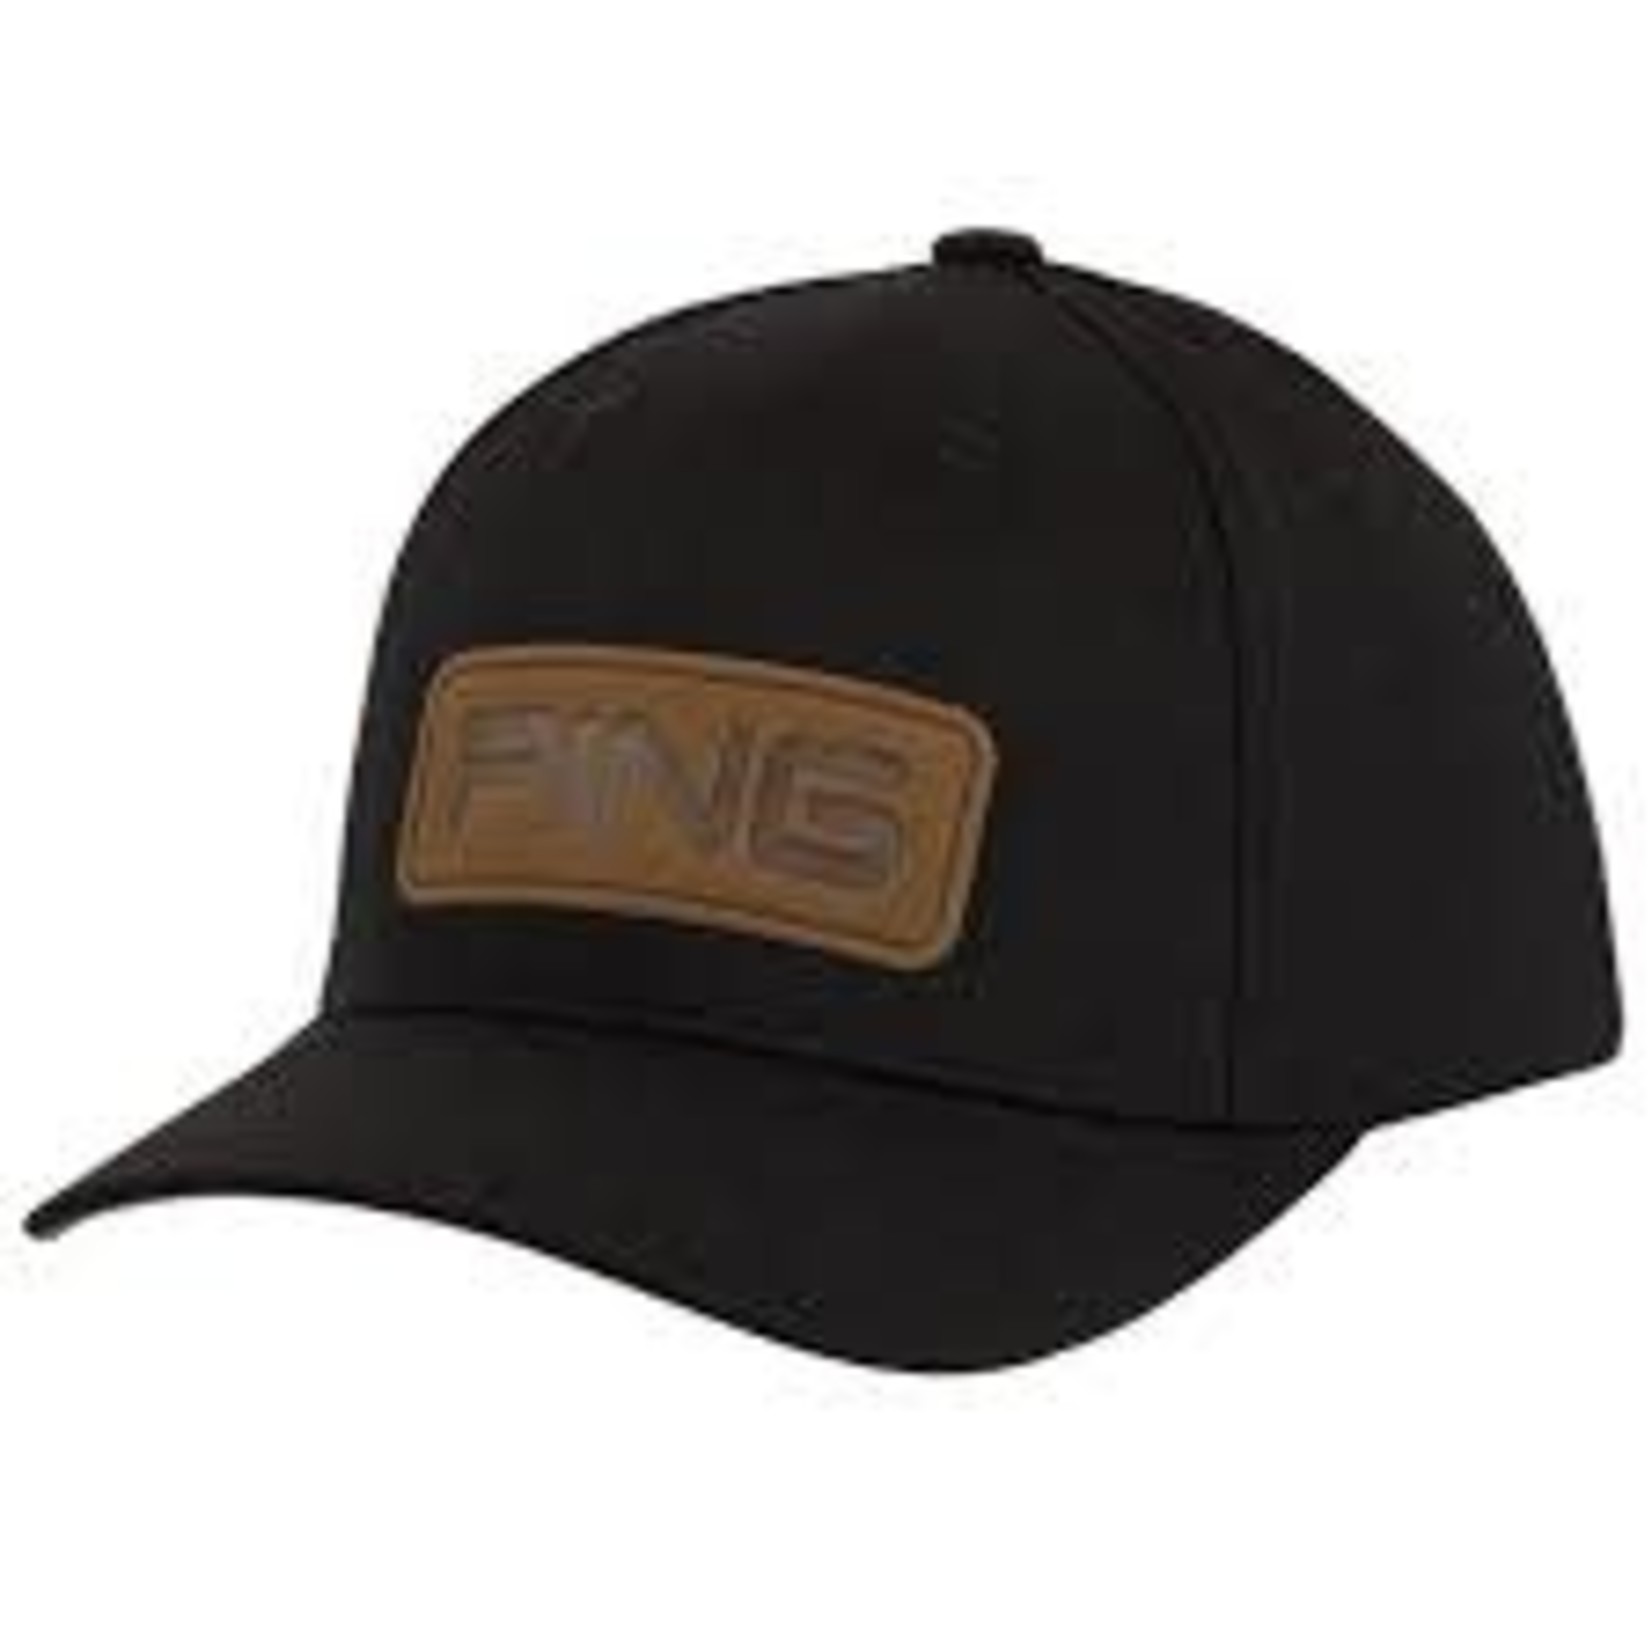 Ping PING Clubhouse Cap - Black